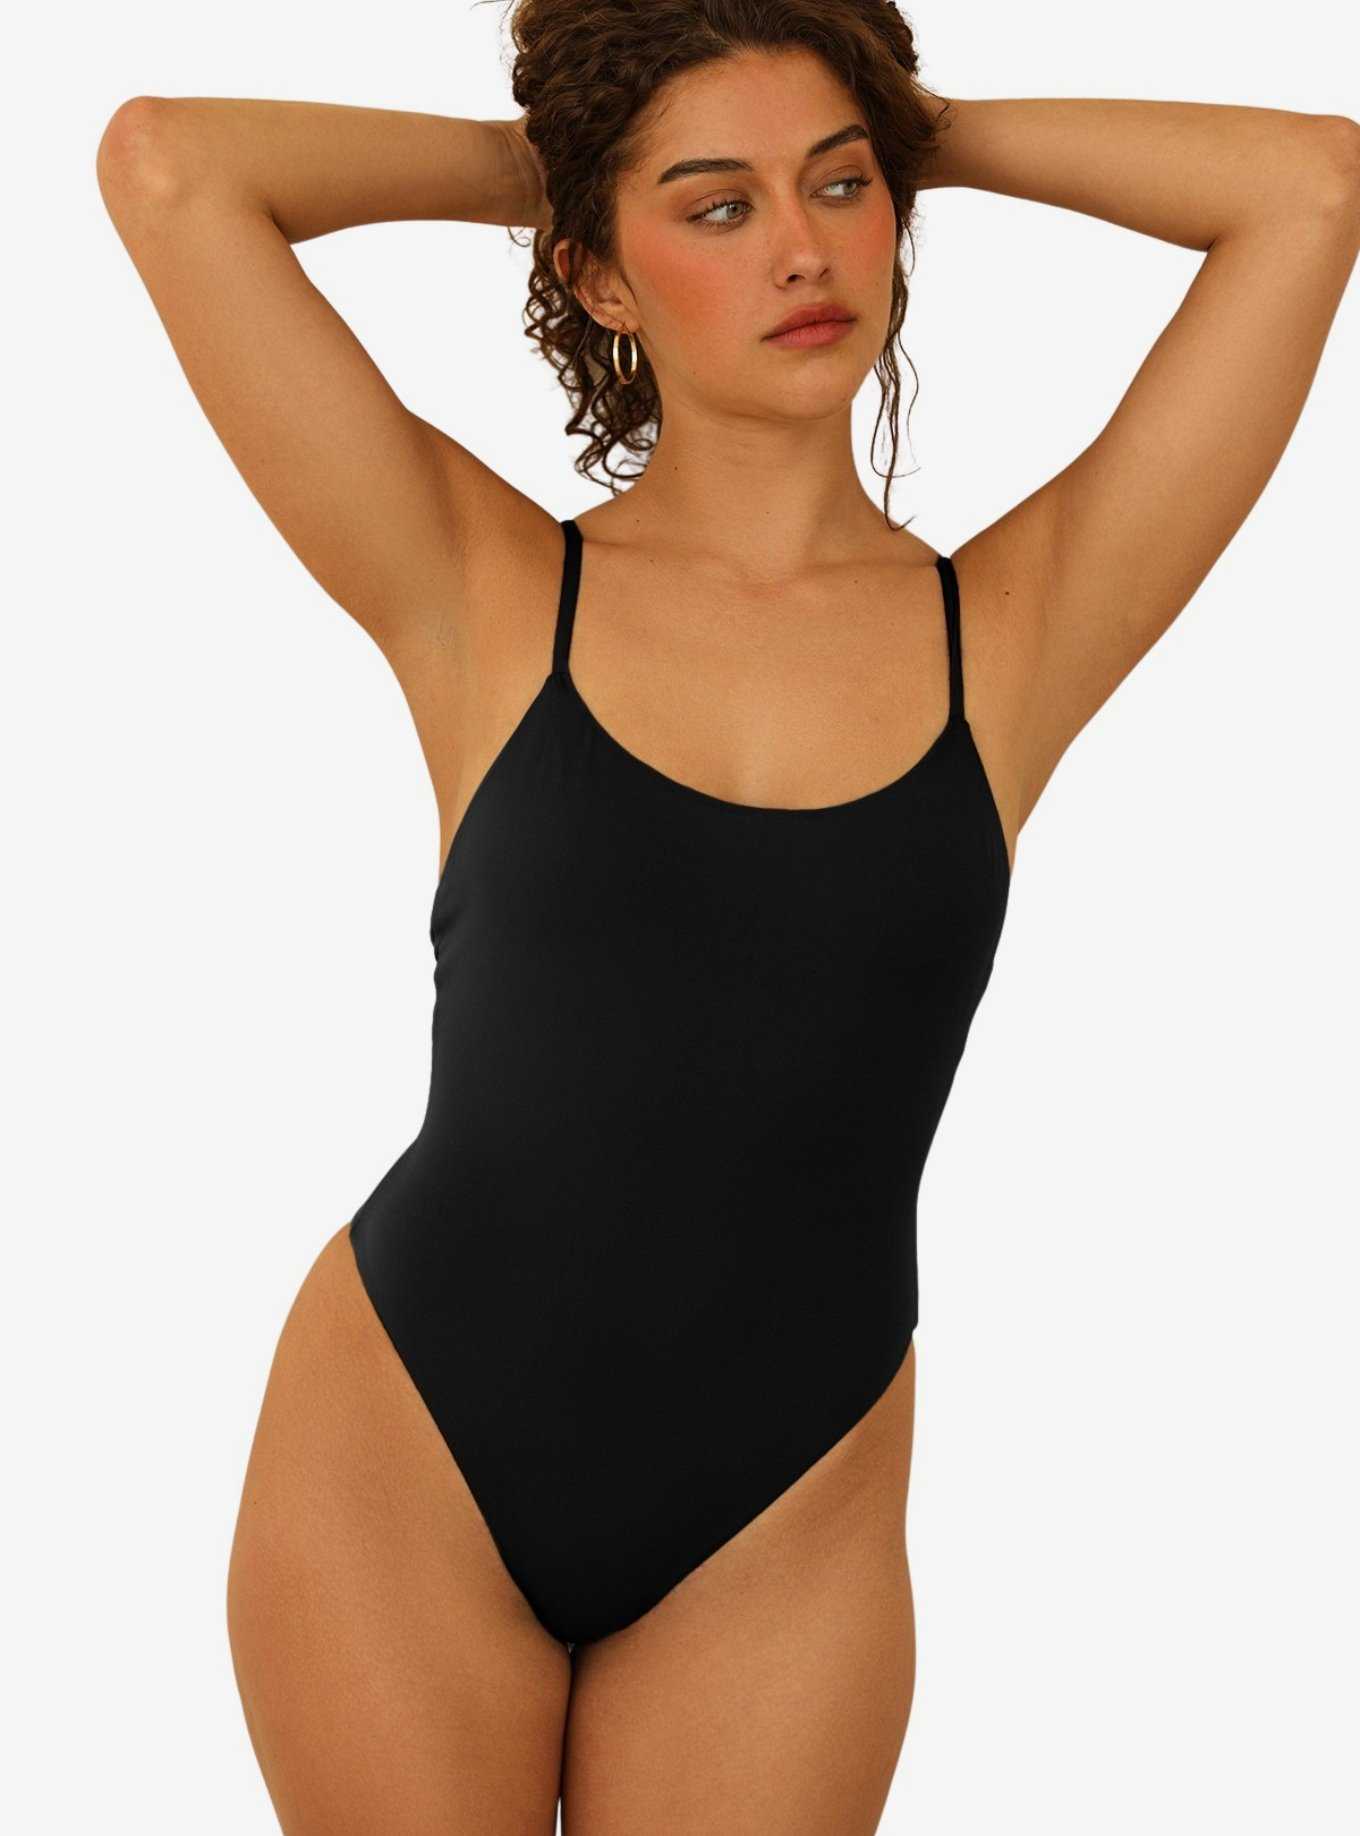 Dippin' Daisy's Star One Piece Black, , hi-res